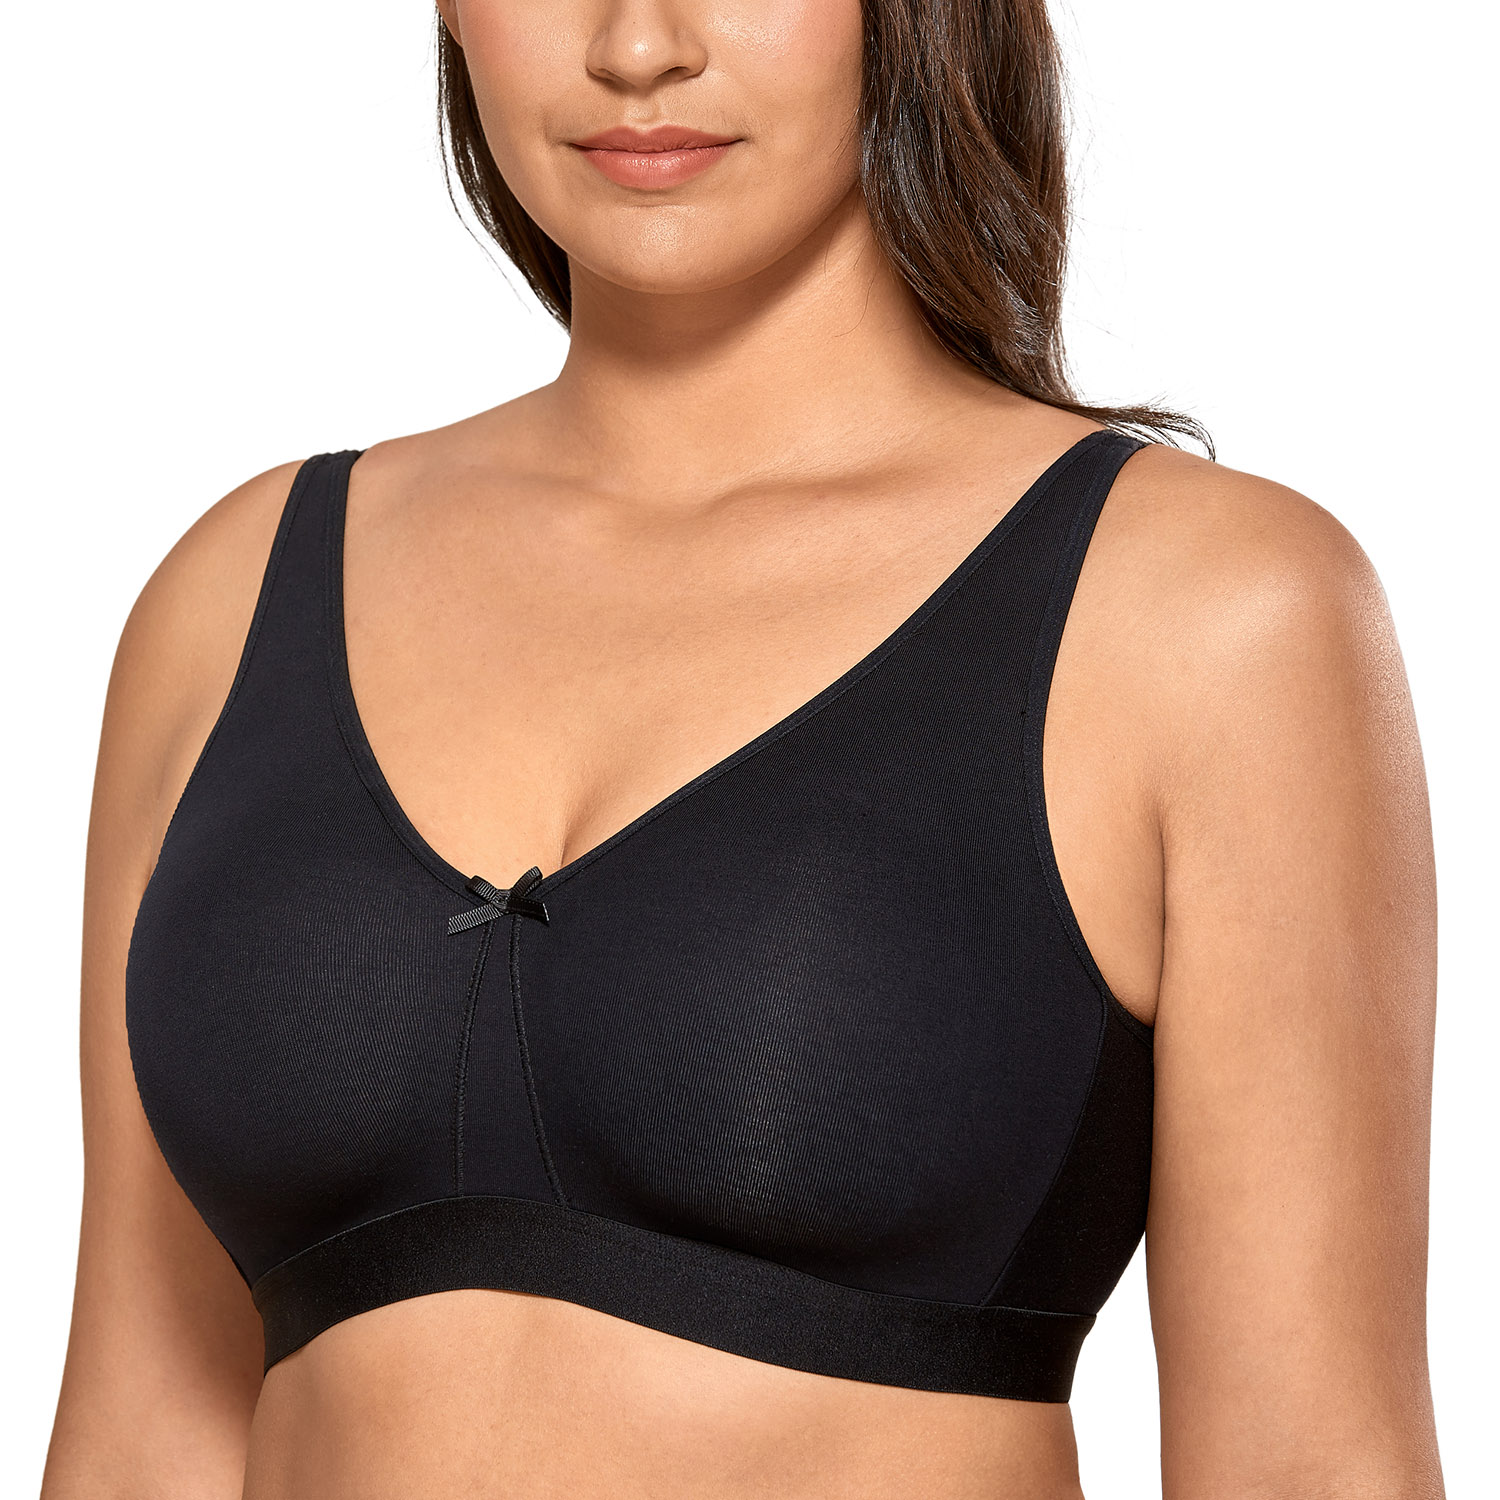 AISILIN Women's Plus Size Bras Minimizer Underwire Seamless Unlined Cup